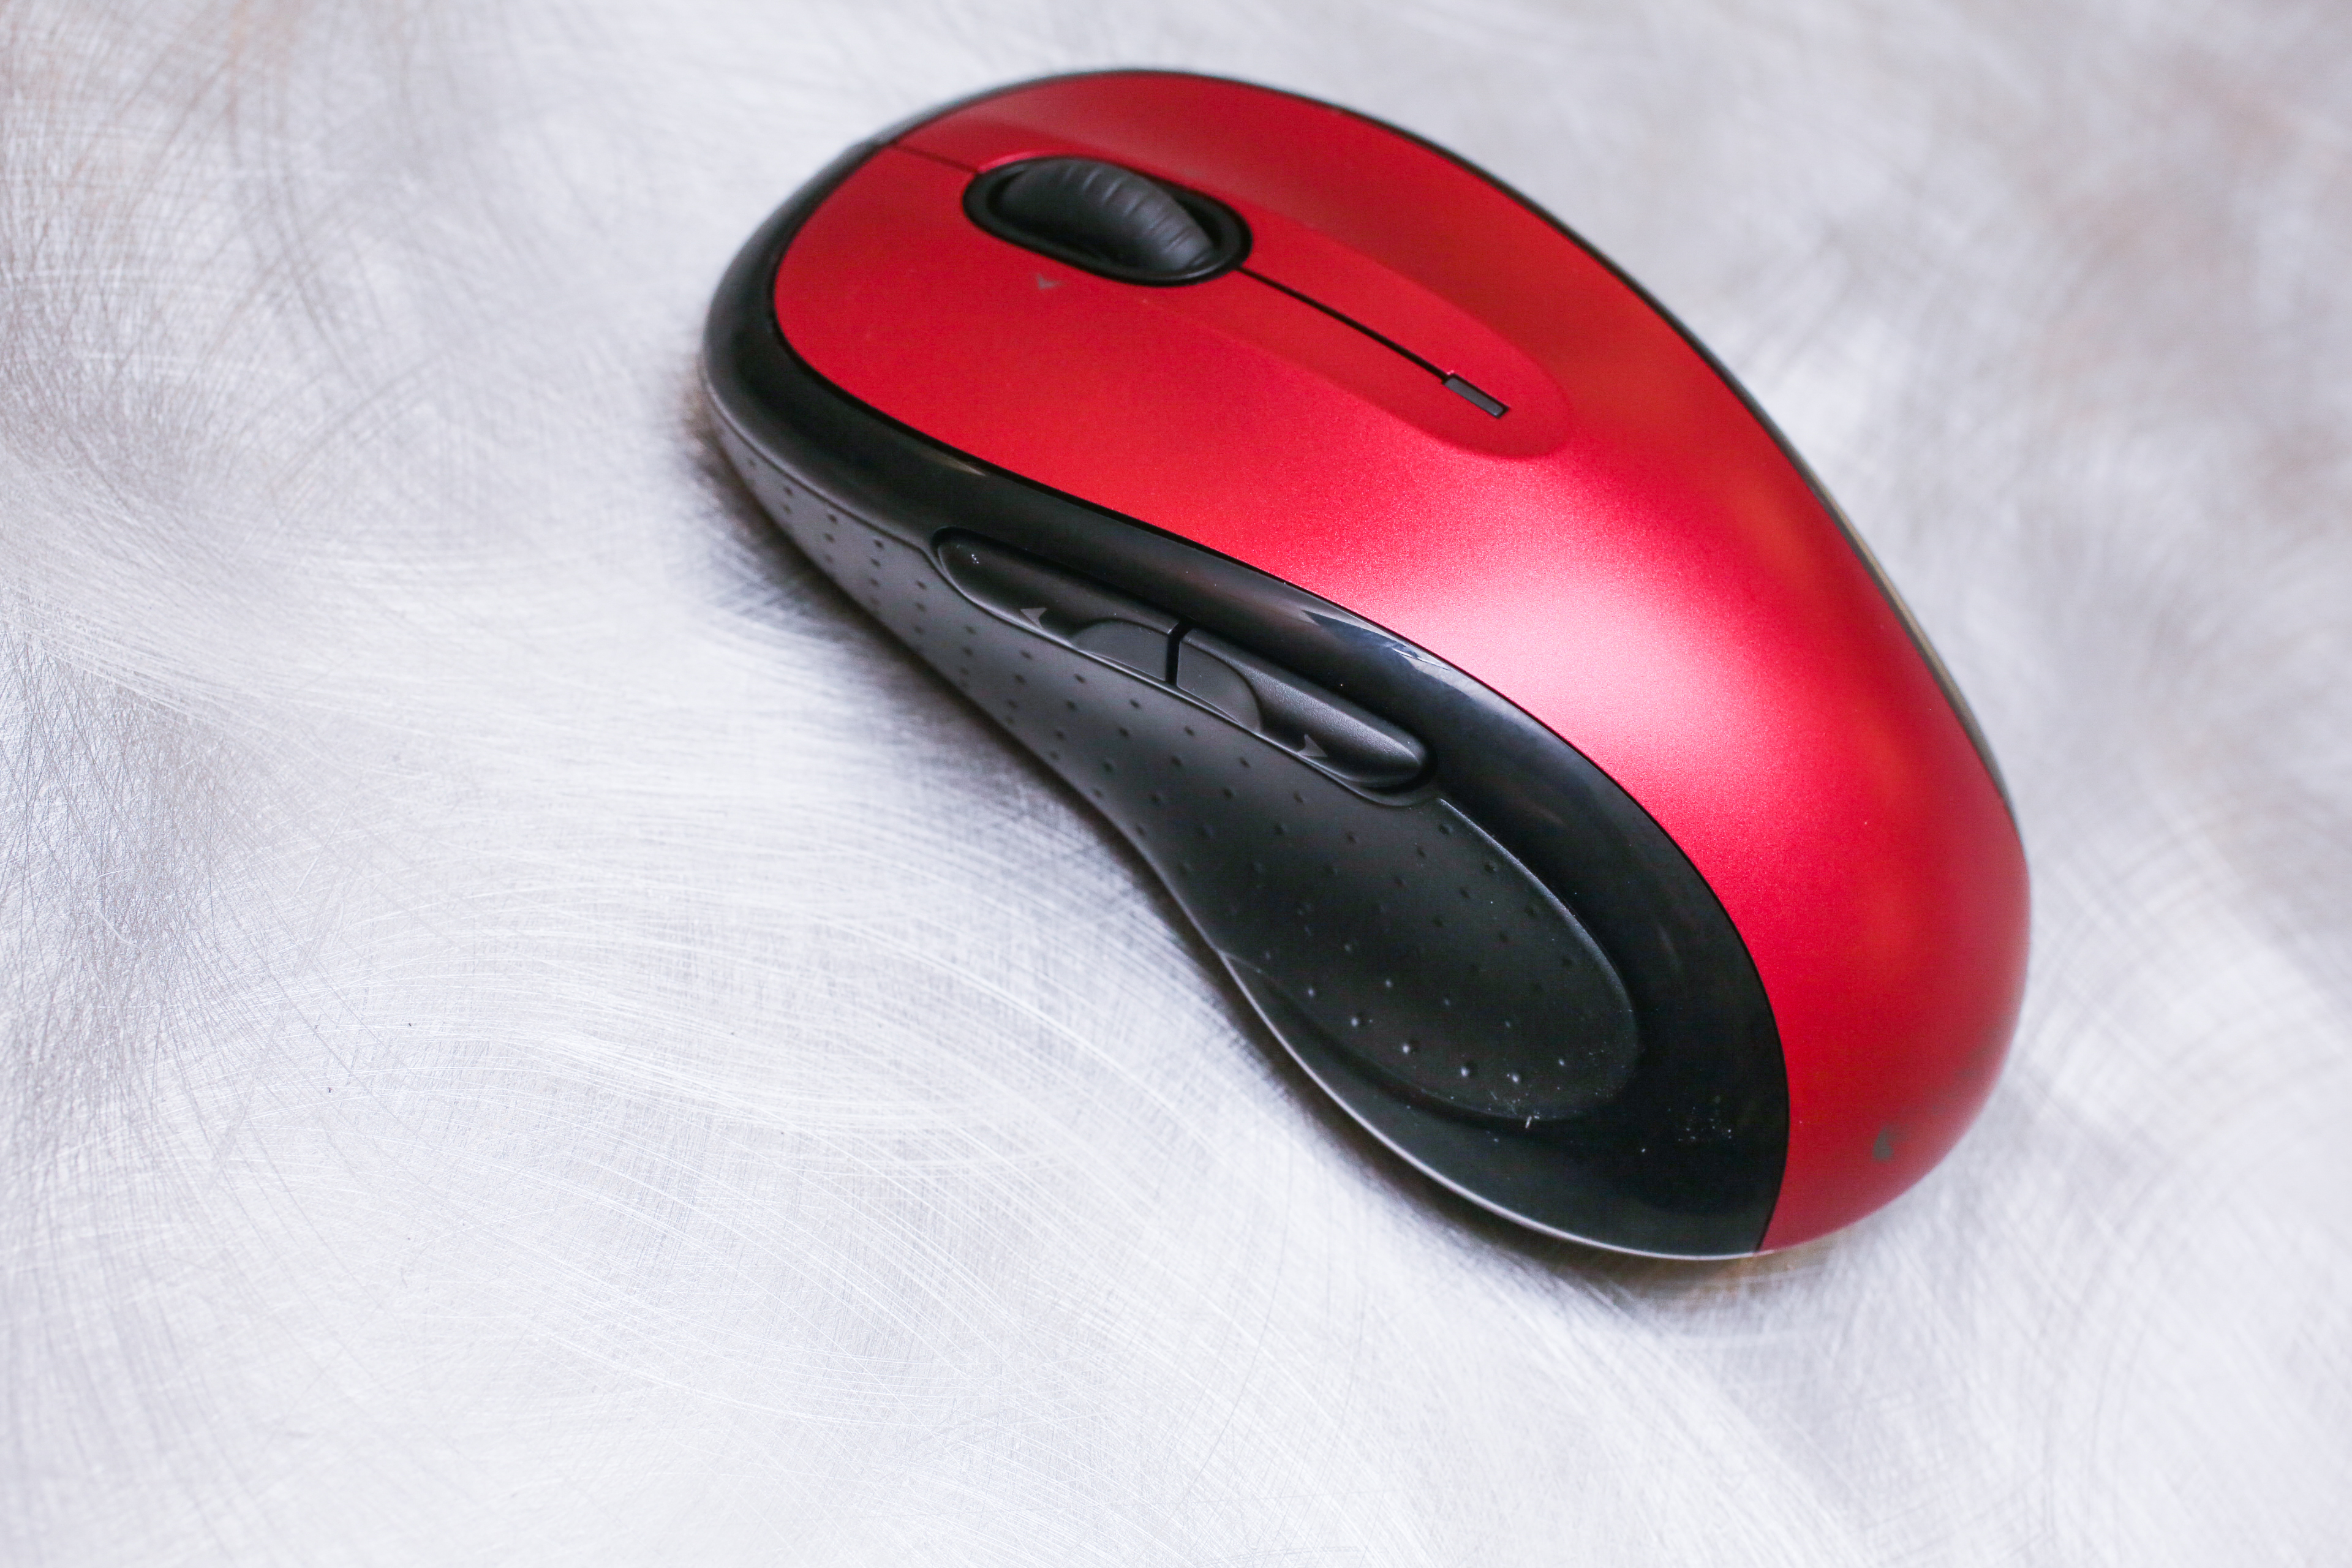 Logitech Mouse M510 review: This Logitech mouse is so slick, you may never go back - CNET